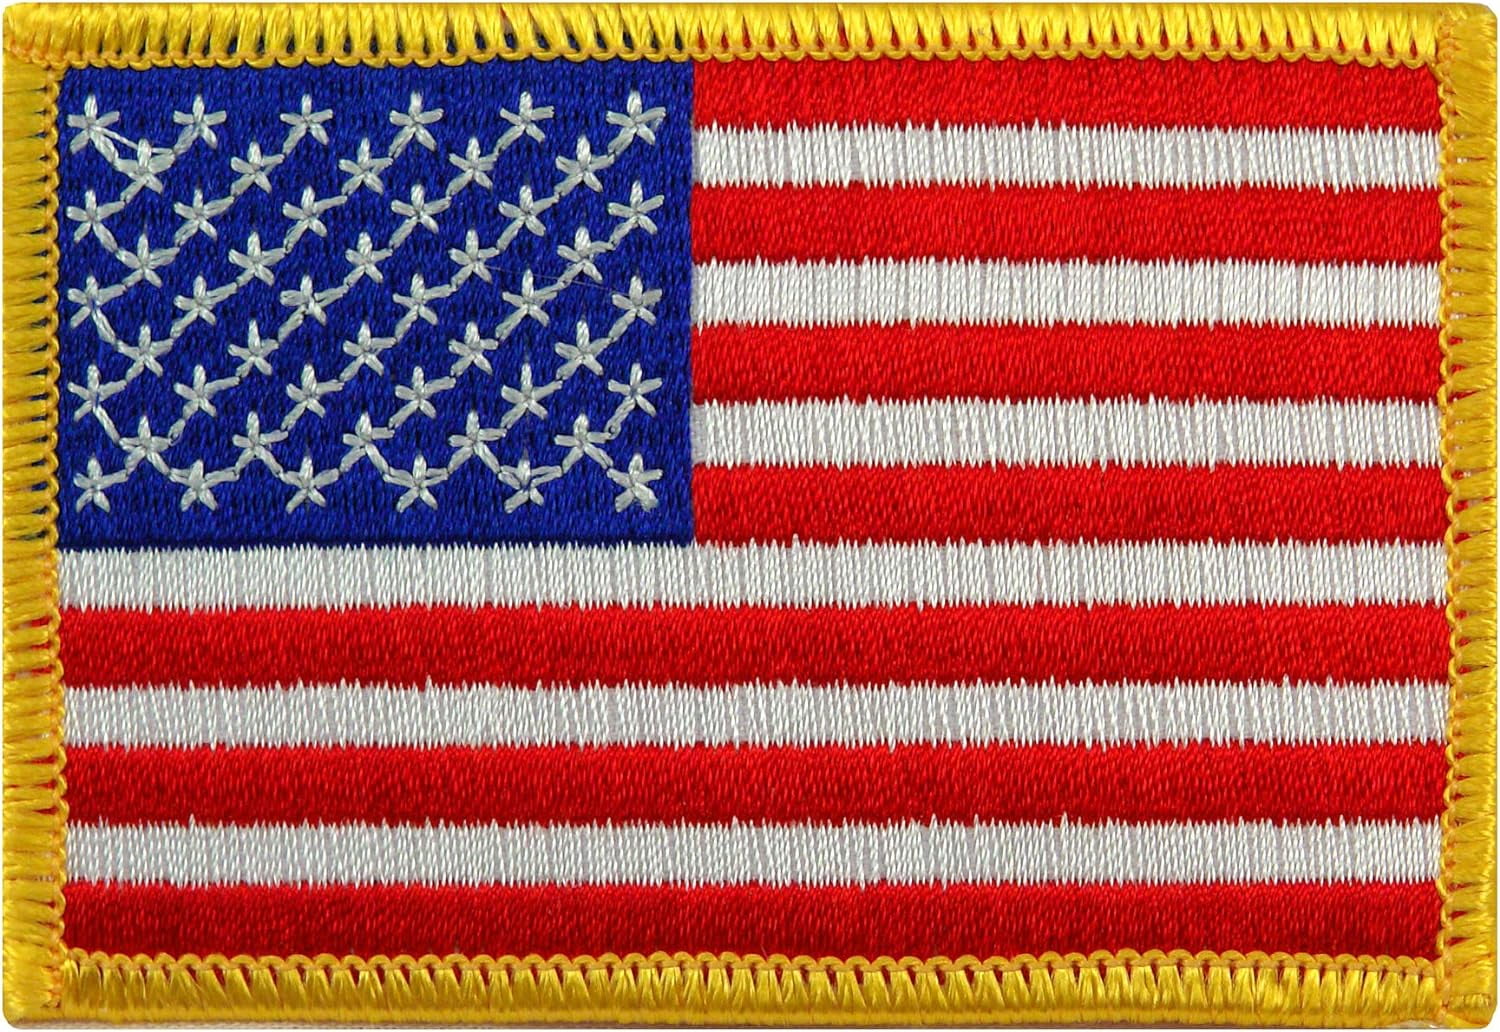 2 American Flag Embroidered Patch Iron on Gold Border USA US United Stated New !